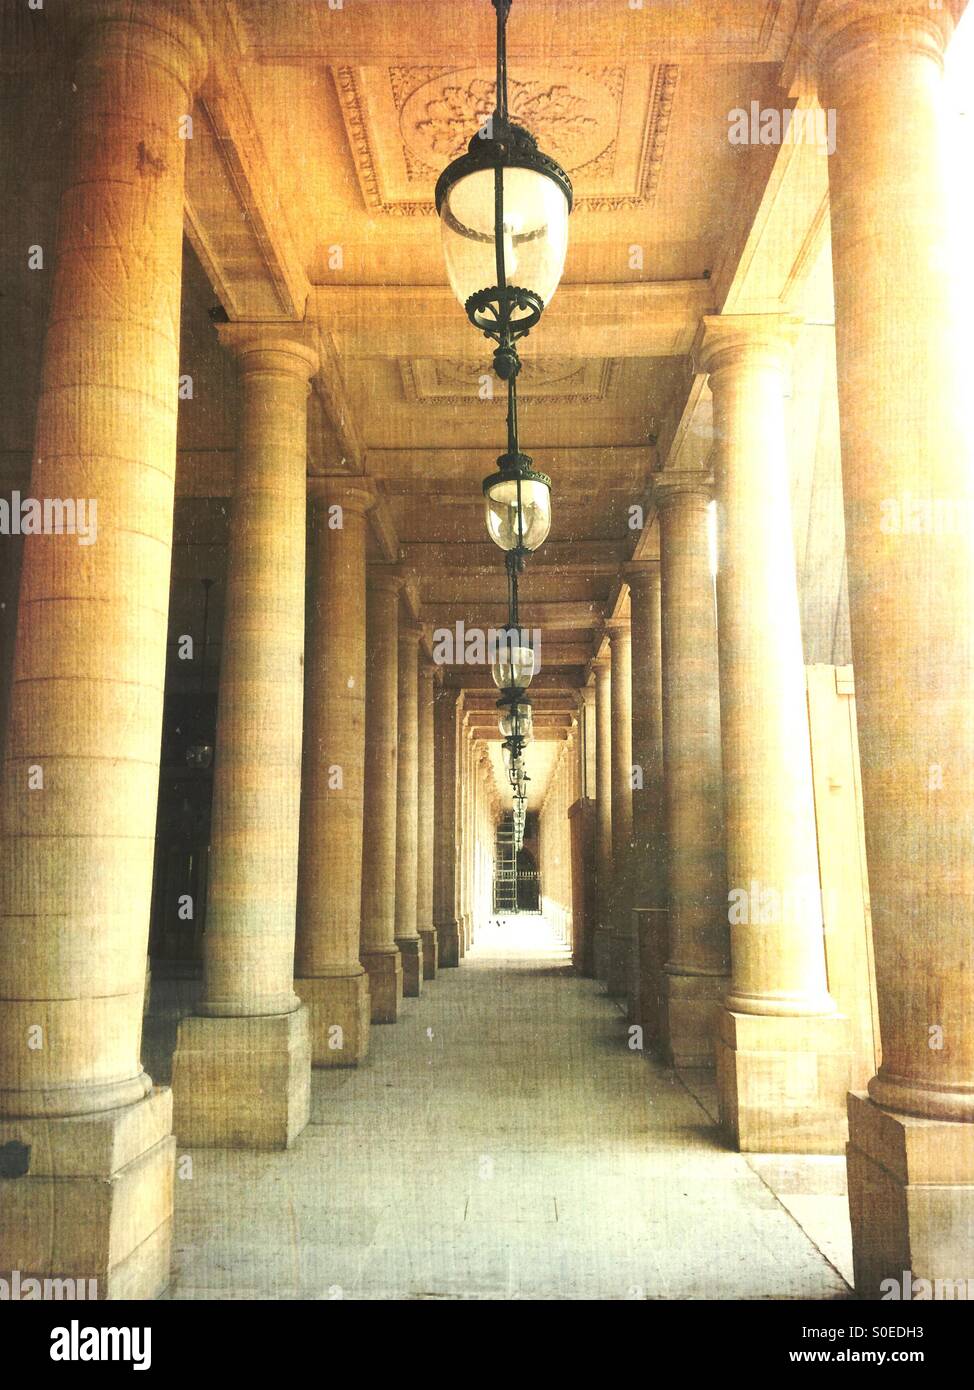 Beautiful classical columns and antique pendant ceiling lamps line the arcade of Valois Gallery at Palais-Royal. 1st arrondissement or district in central Paris, France. Vintage texture overlay. Stock Photo